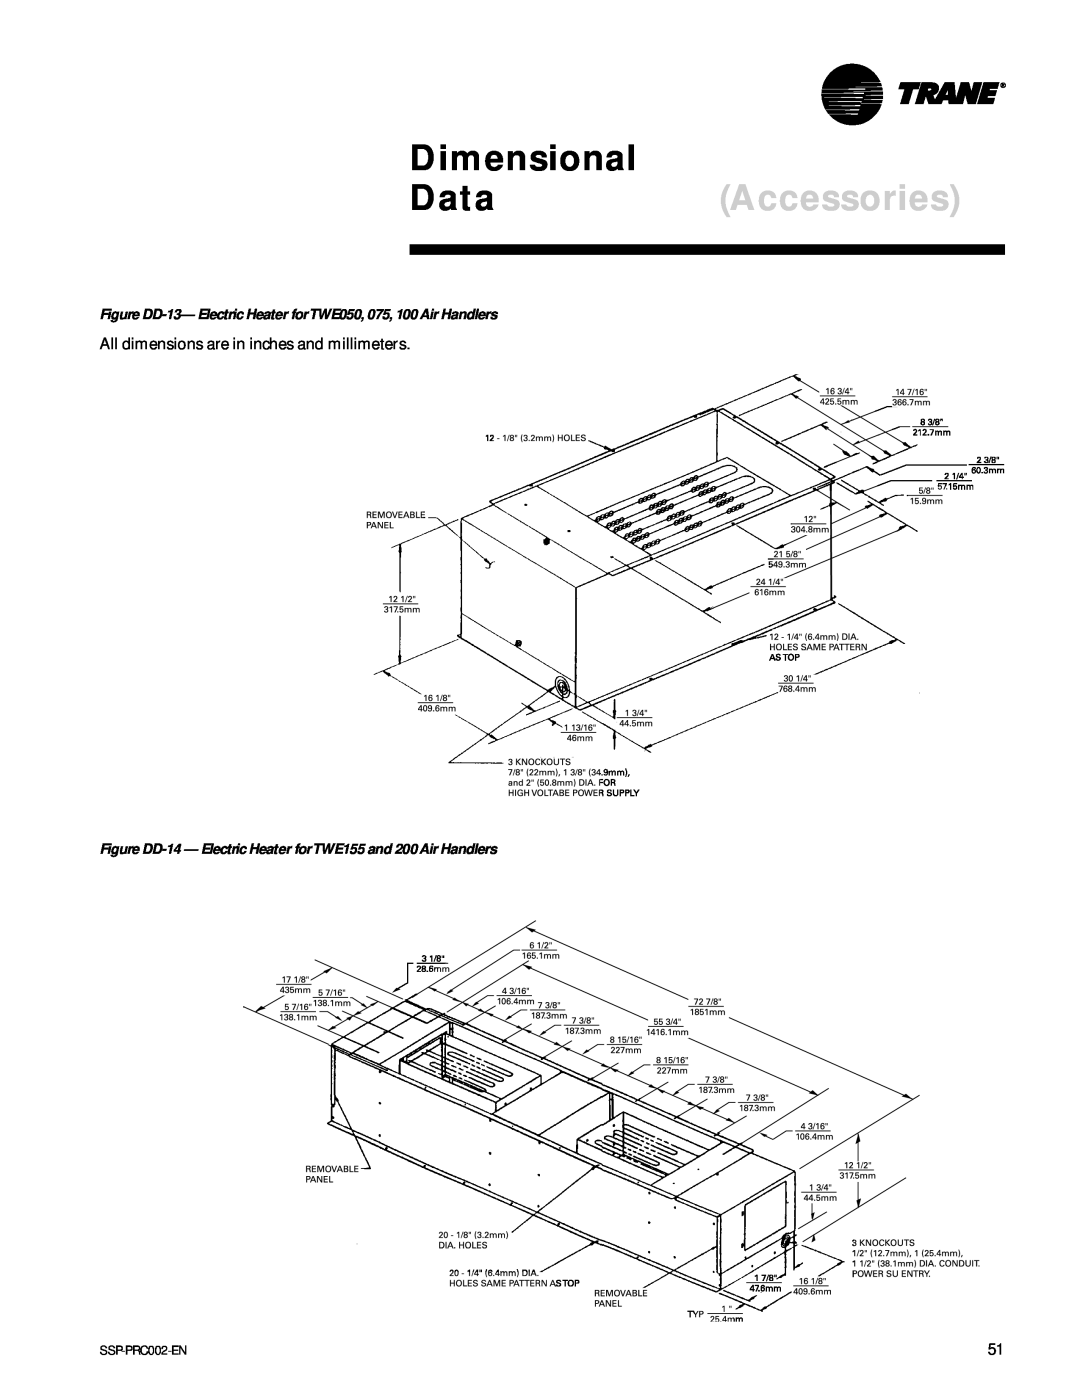 Trane TWE050A, TWA075A, TWE200B, TWA200B manual DataAccessories, Dimensional, All dimensions are in inches and millimeters 